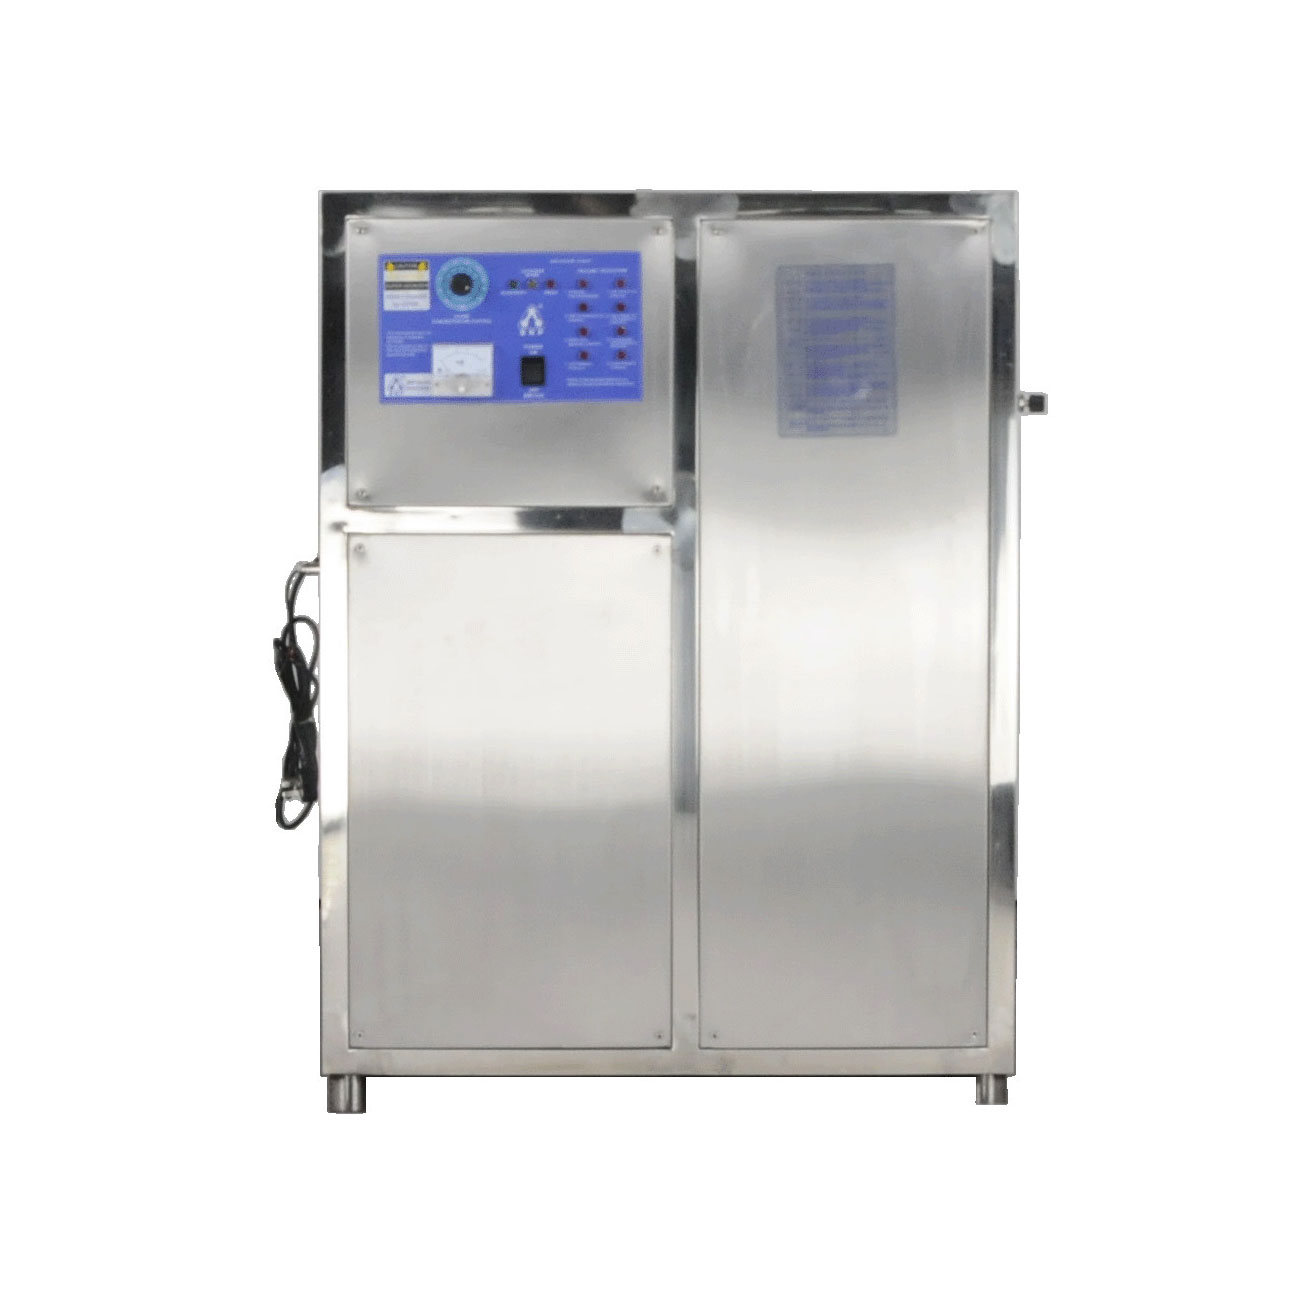 Popular Design for Ozone Air Generator - Reliable Supplier China BNP SOZ-YW-200G Industrial Oxygen-Enriched Ozone Generator for Public Place Air Purifier and O3 Sterilizer Water Disinfection ̵...